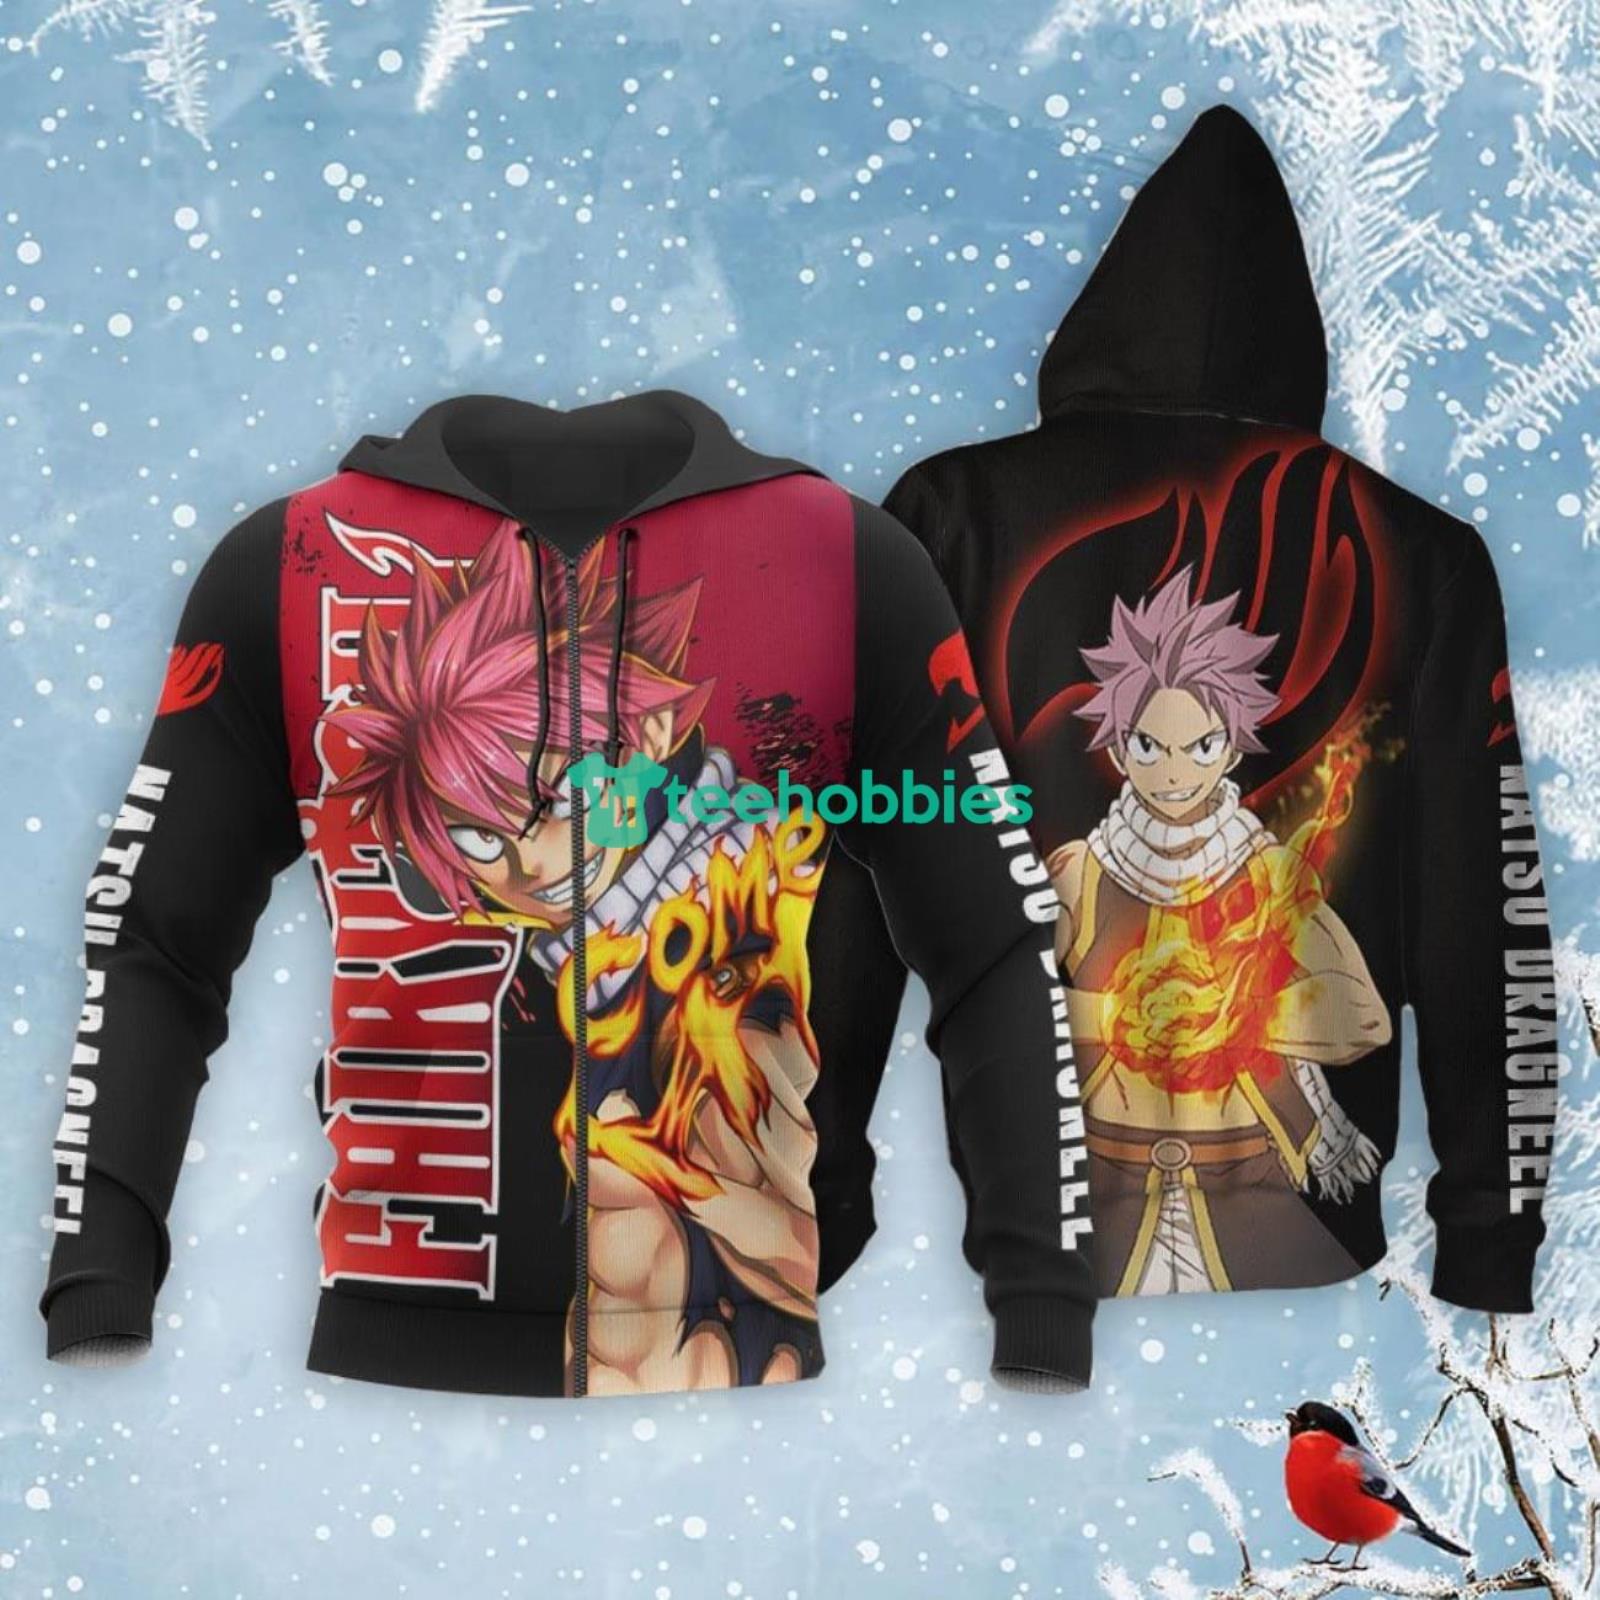 Natsu Dragneel All Over Printed 3D Shirt Fairy Tail Anime Fans Product Photo 1 Product photo 1